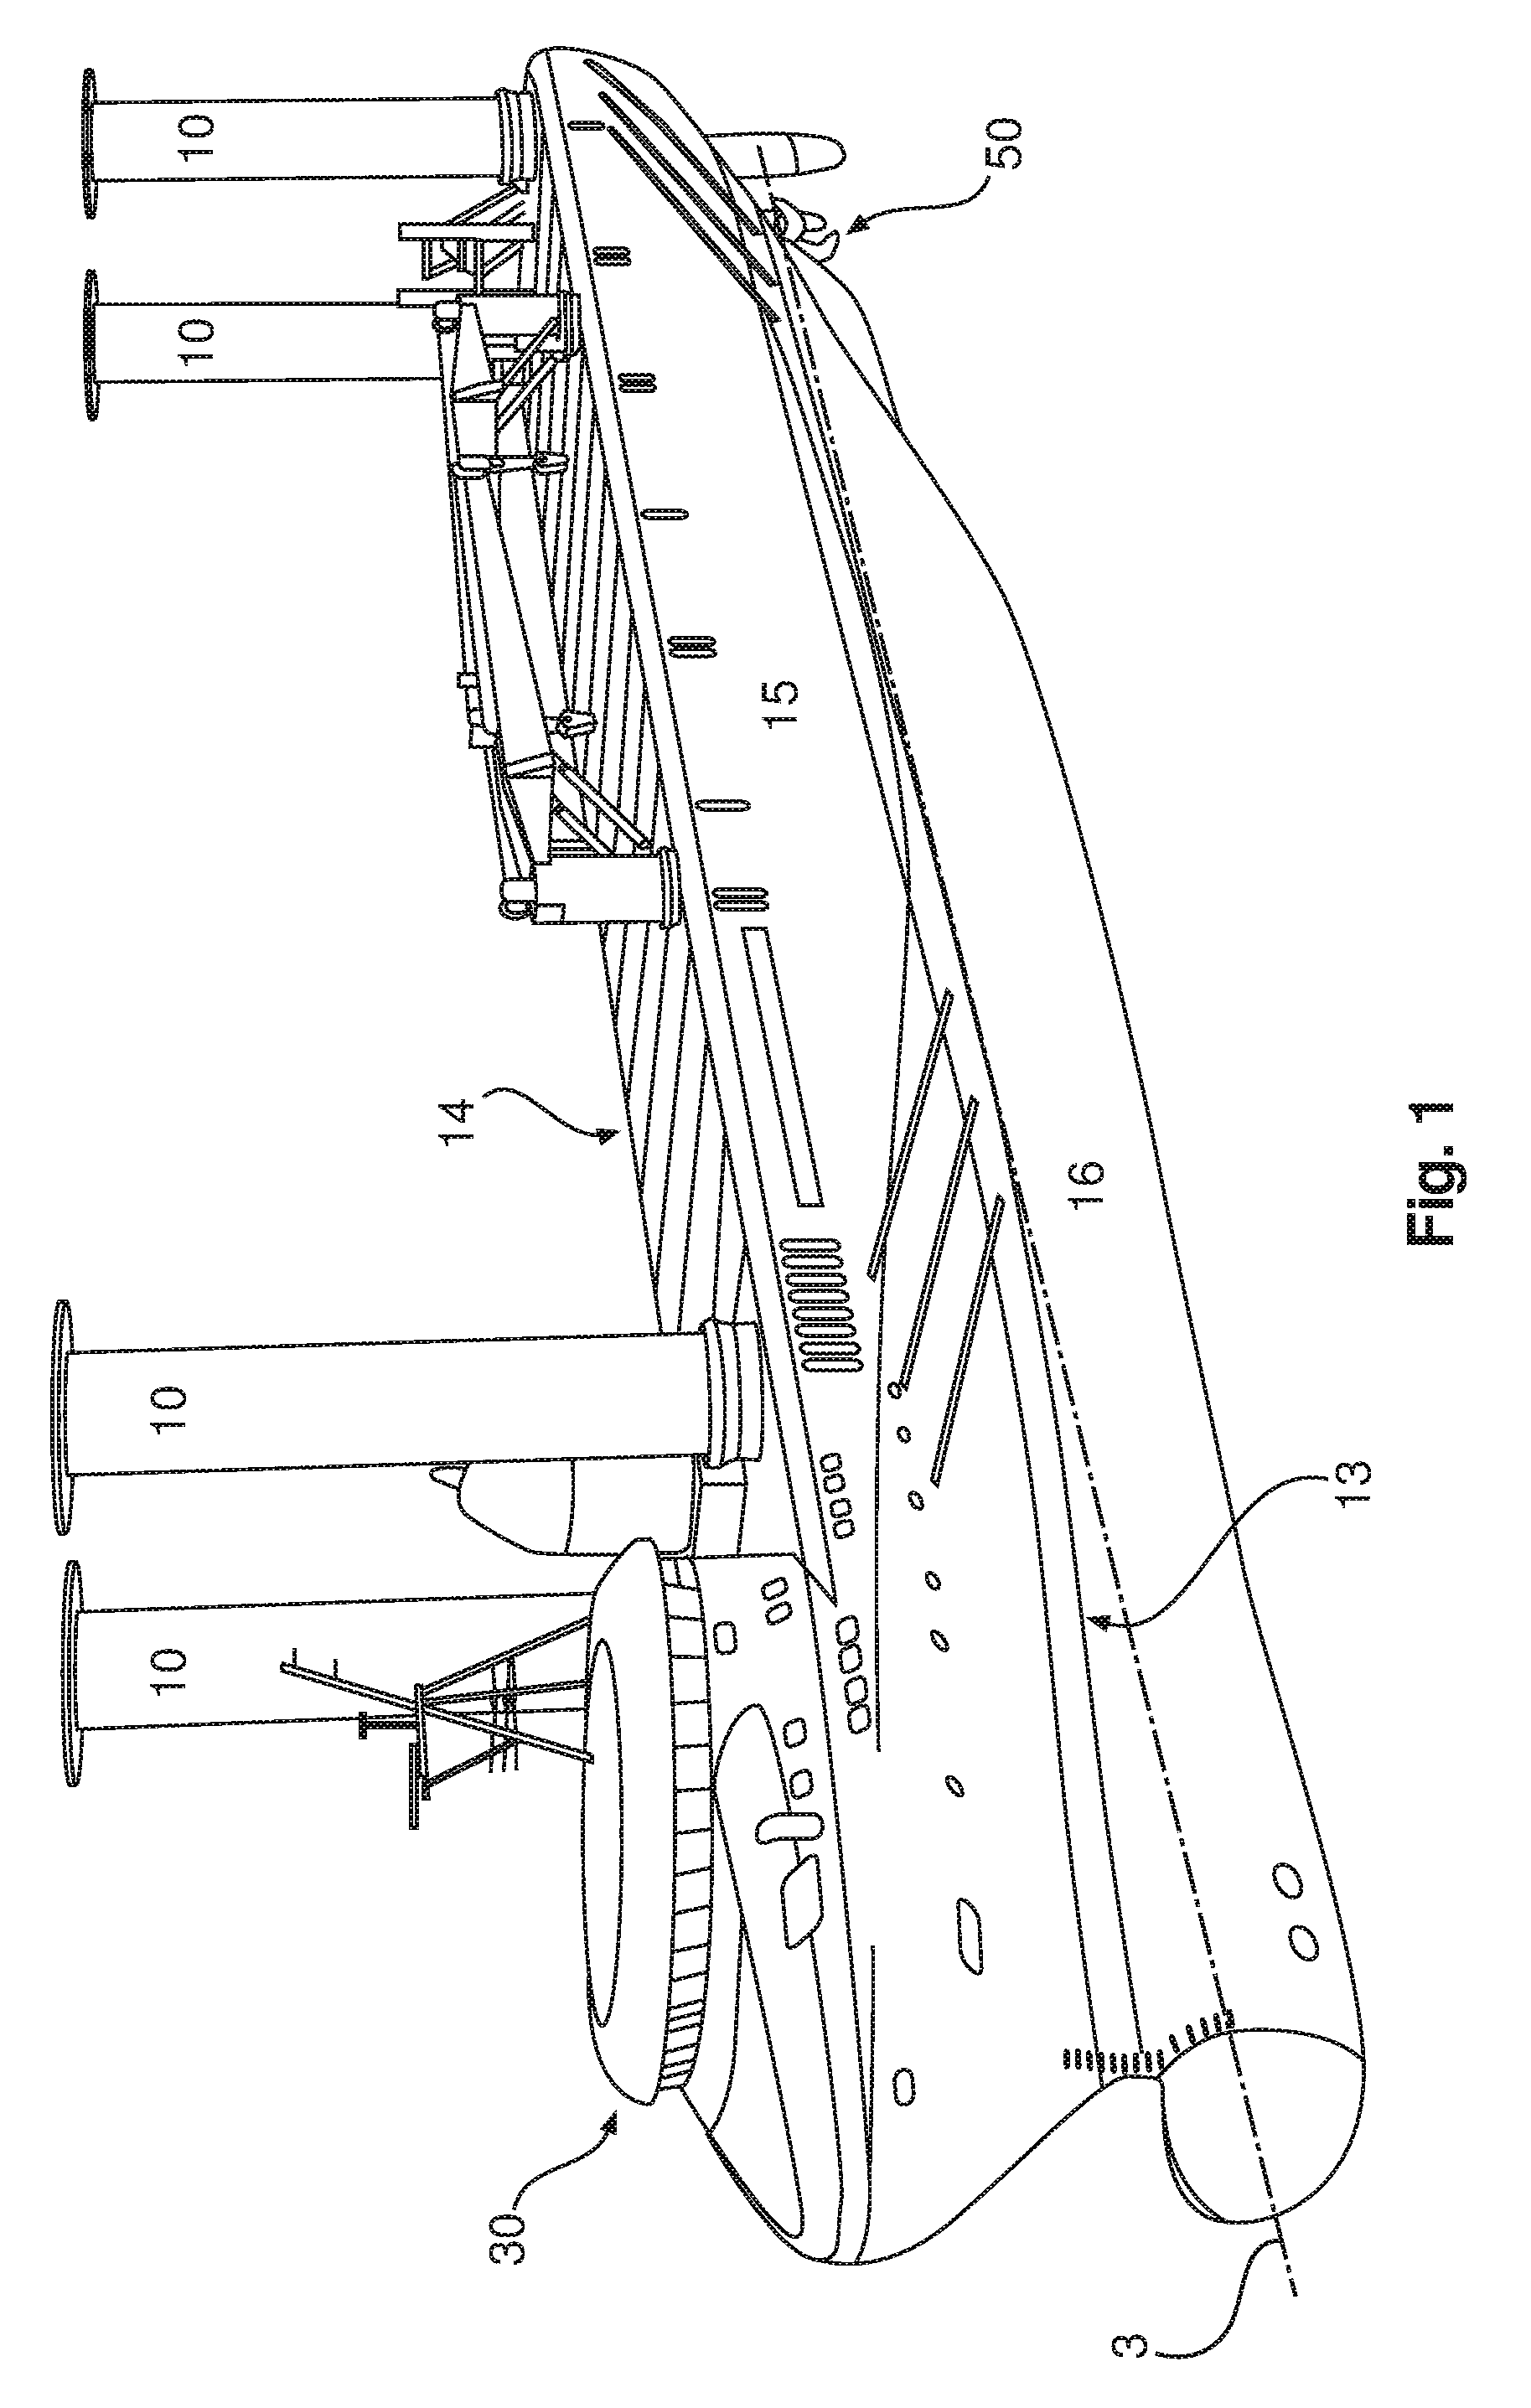 Ship comprising a magnus rotor and force-measuring device